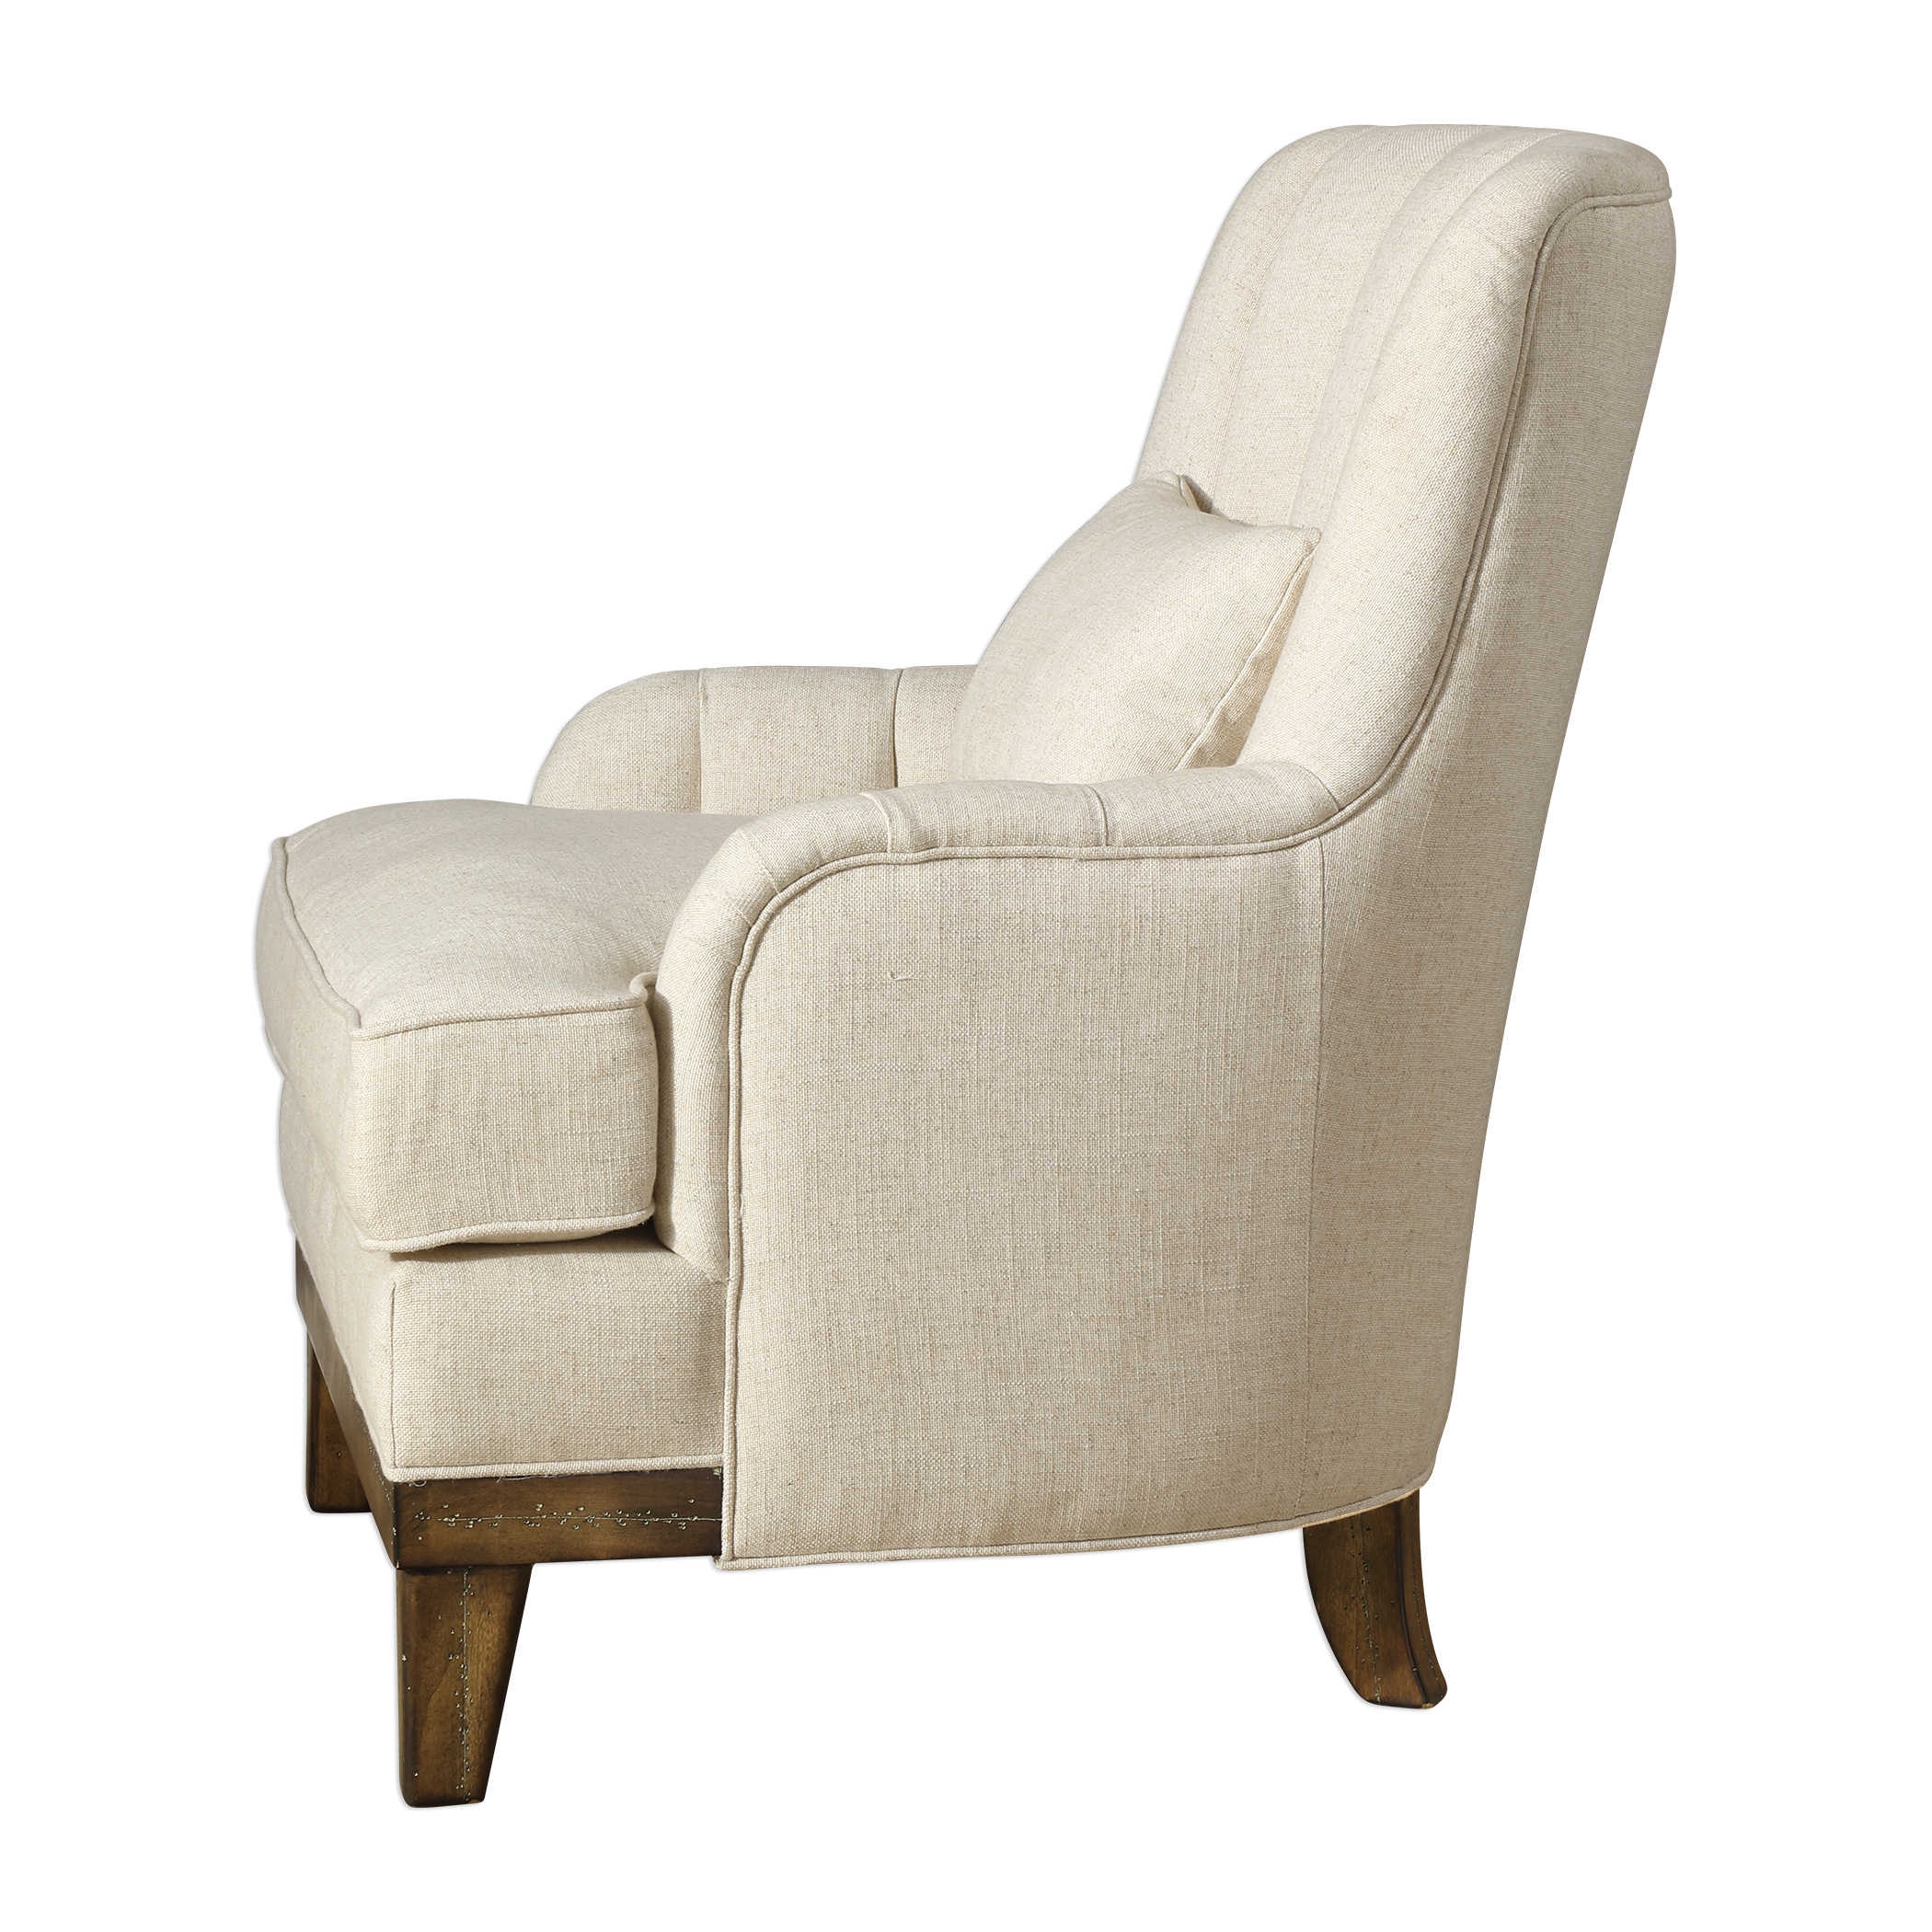 DENNEY ACCENT CHAIR - Image 3